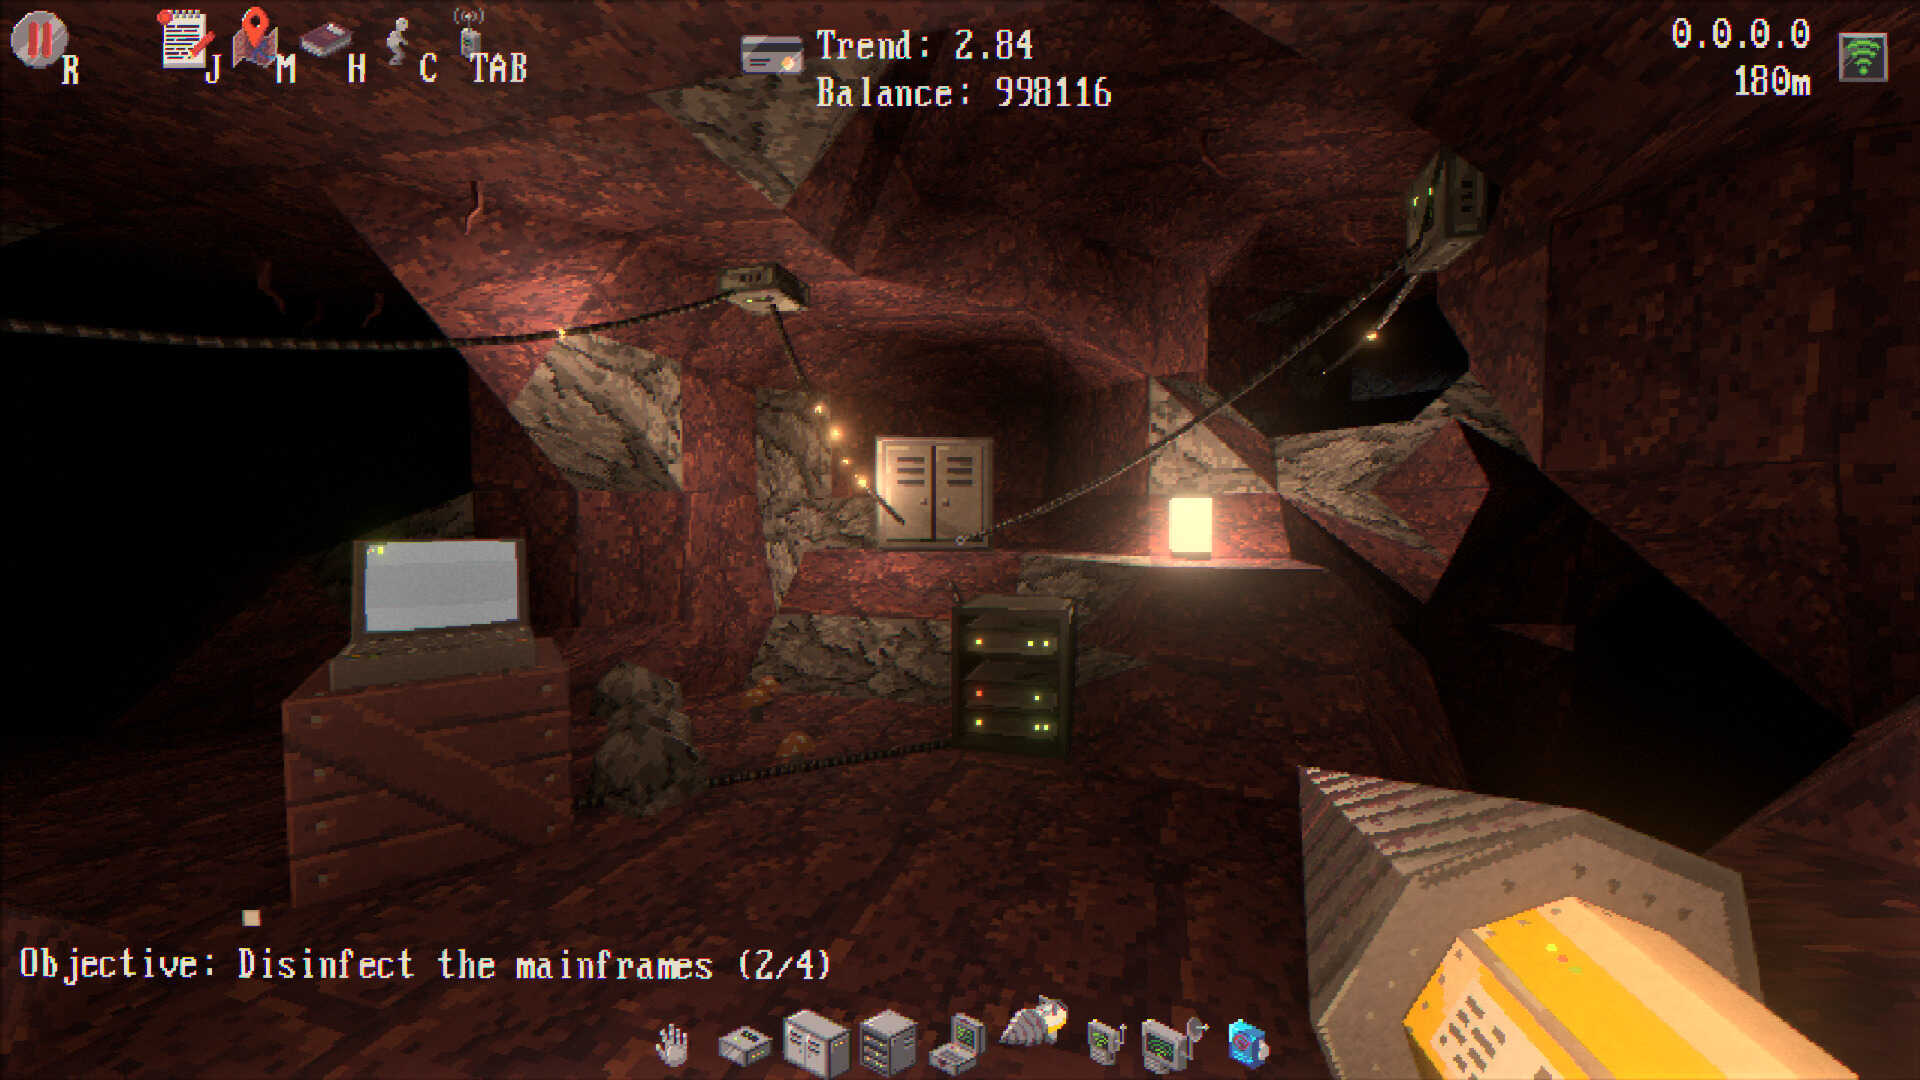 Tunnet screenshot: low poly models, blocky terrain, FPS view with a drill in hands